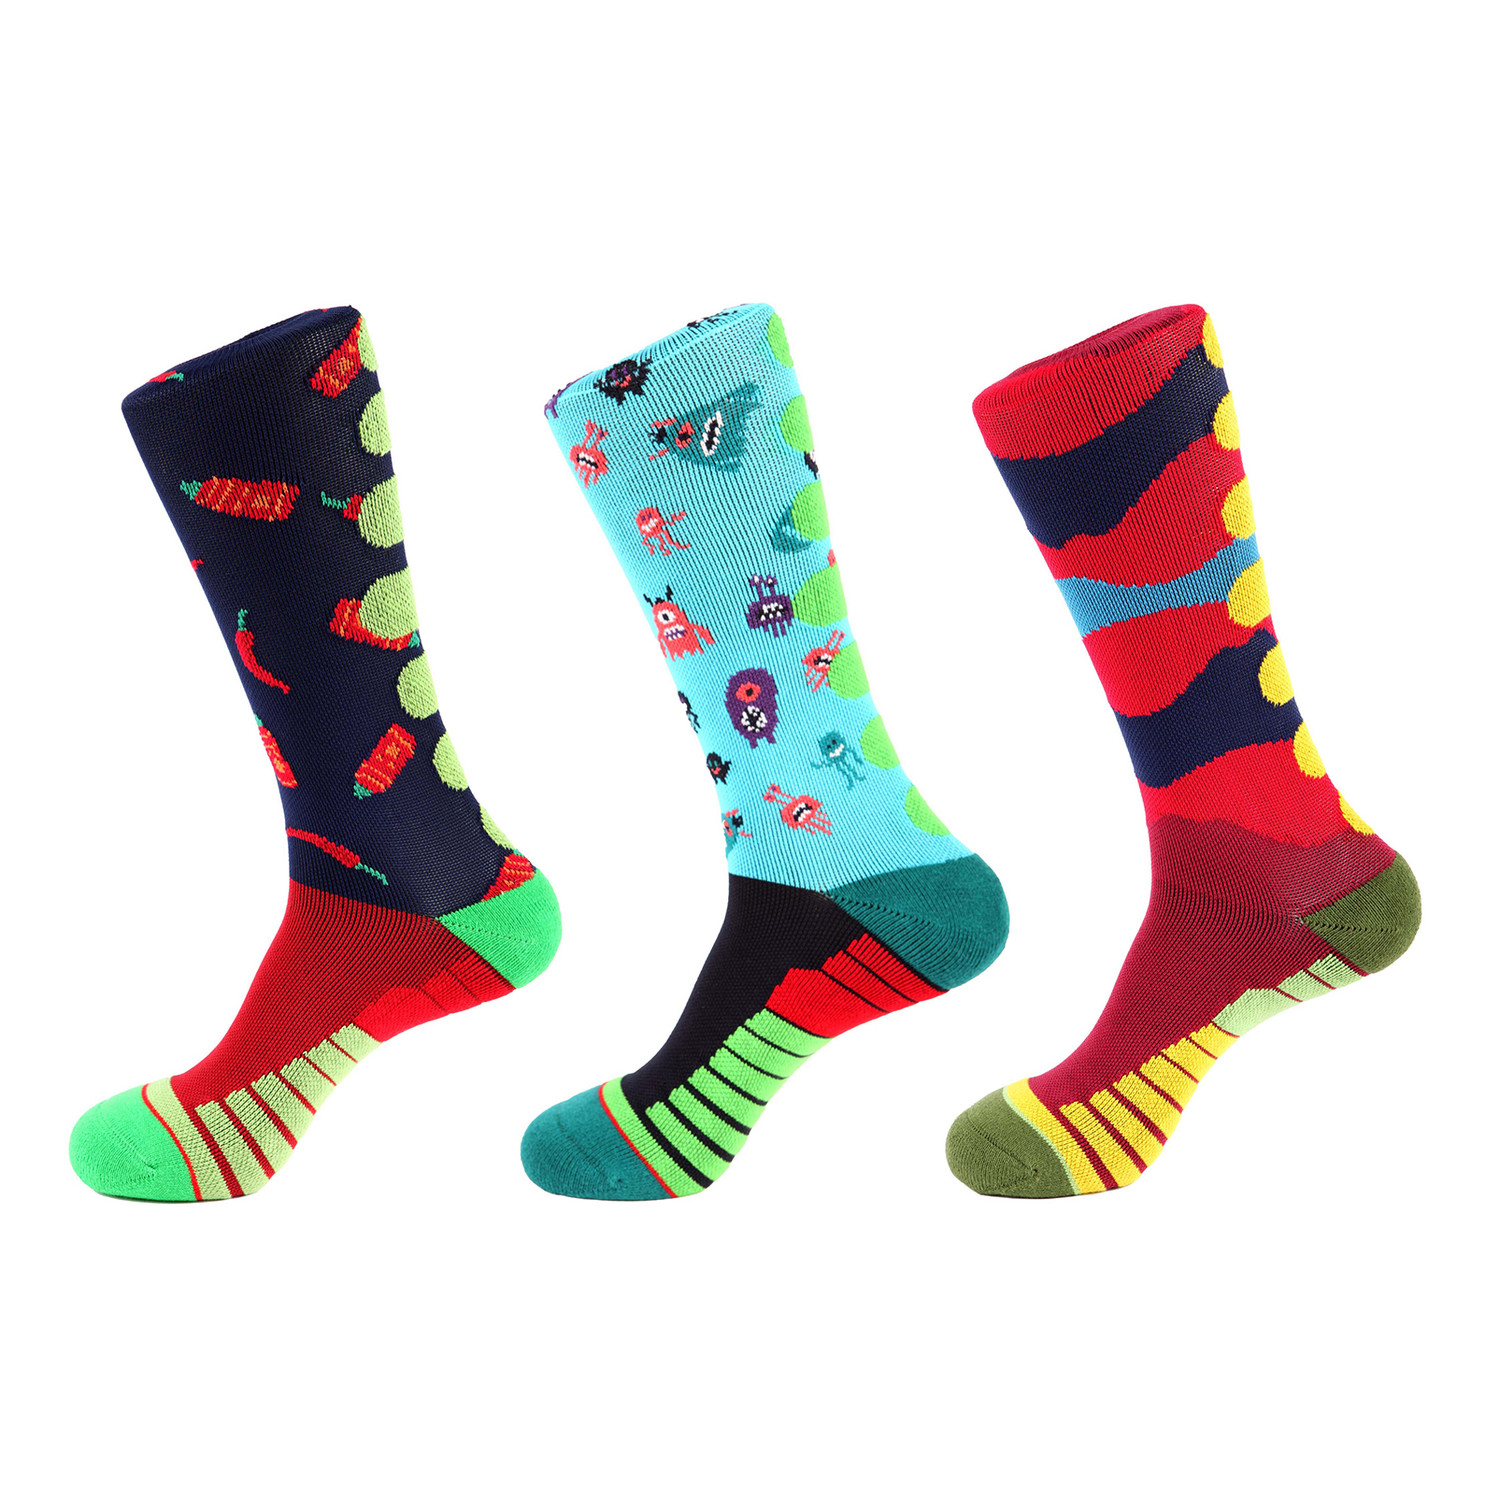 King // 3-Pack Athletic Socks - Unsimply Stitched - Touch of Modern